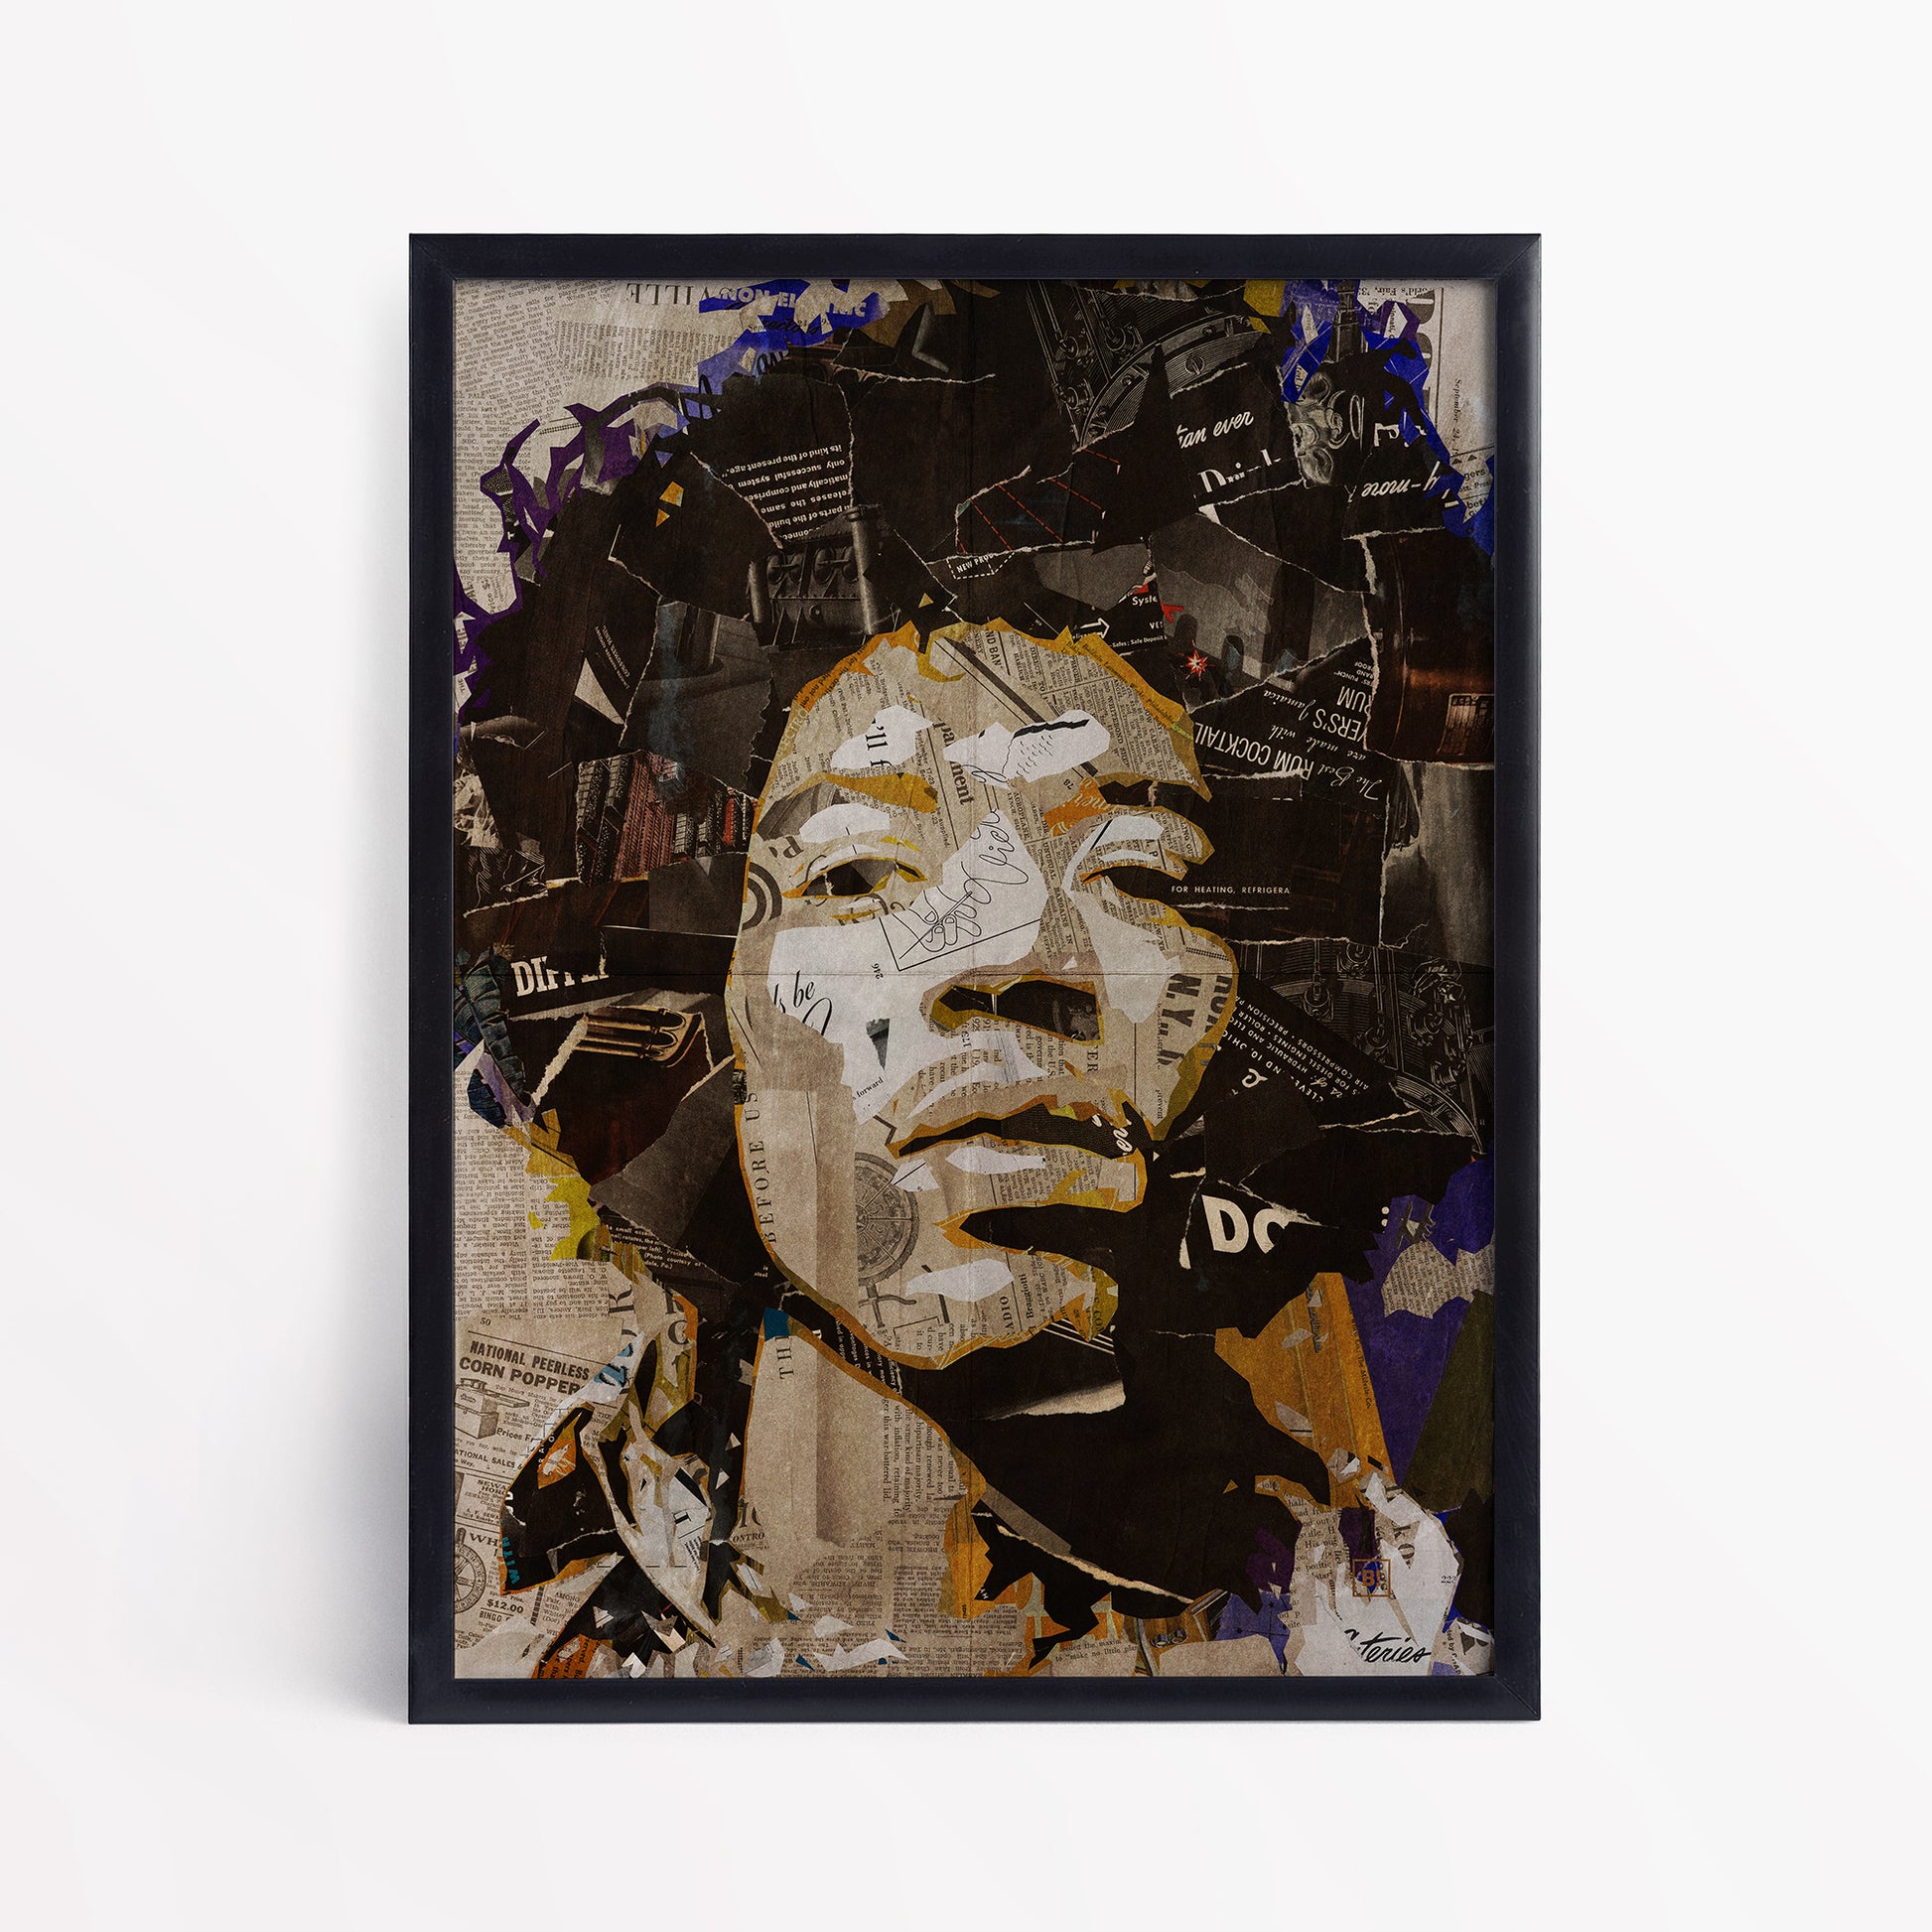 Be inspired by our iconic collage portrait art print of Jimi Hendrix. This artwork has been printed using the giclée process on archival acid-free paper and is presented in a sleek black frame, showcasing its timeless beauty in every detail.